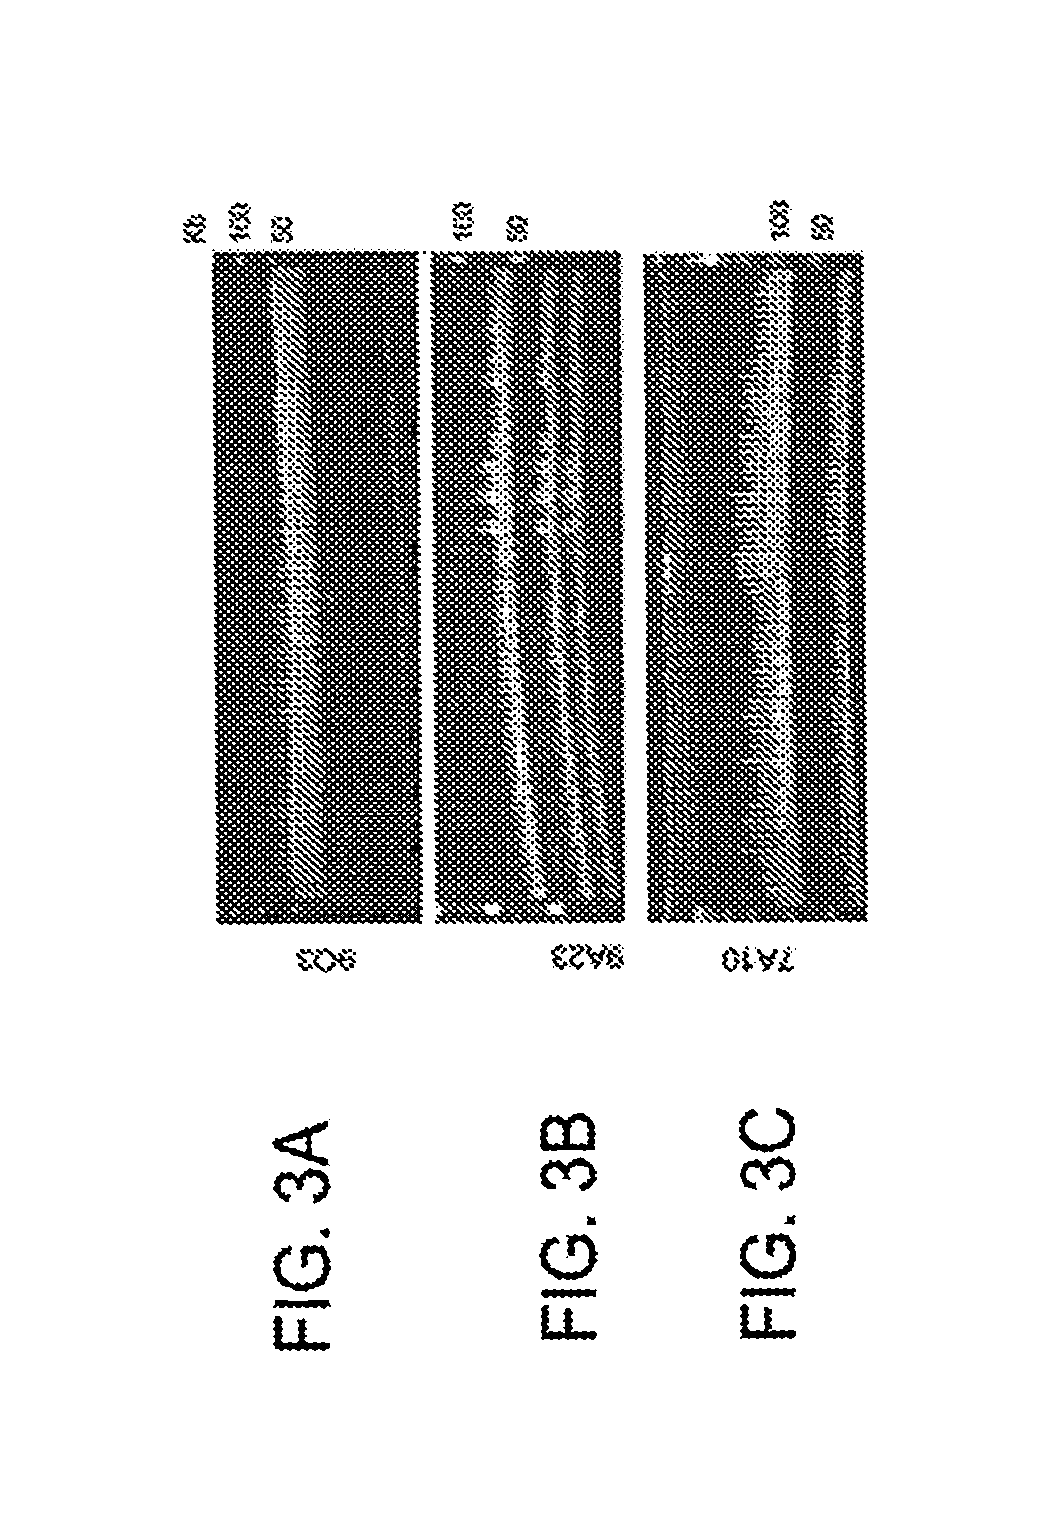 Fungal artificial chromosomes, compositions, methods and uses therefor